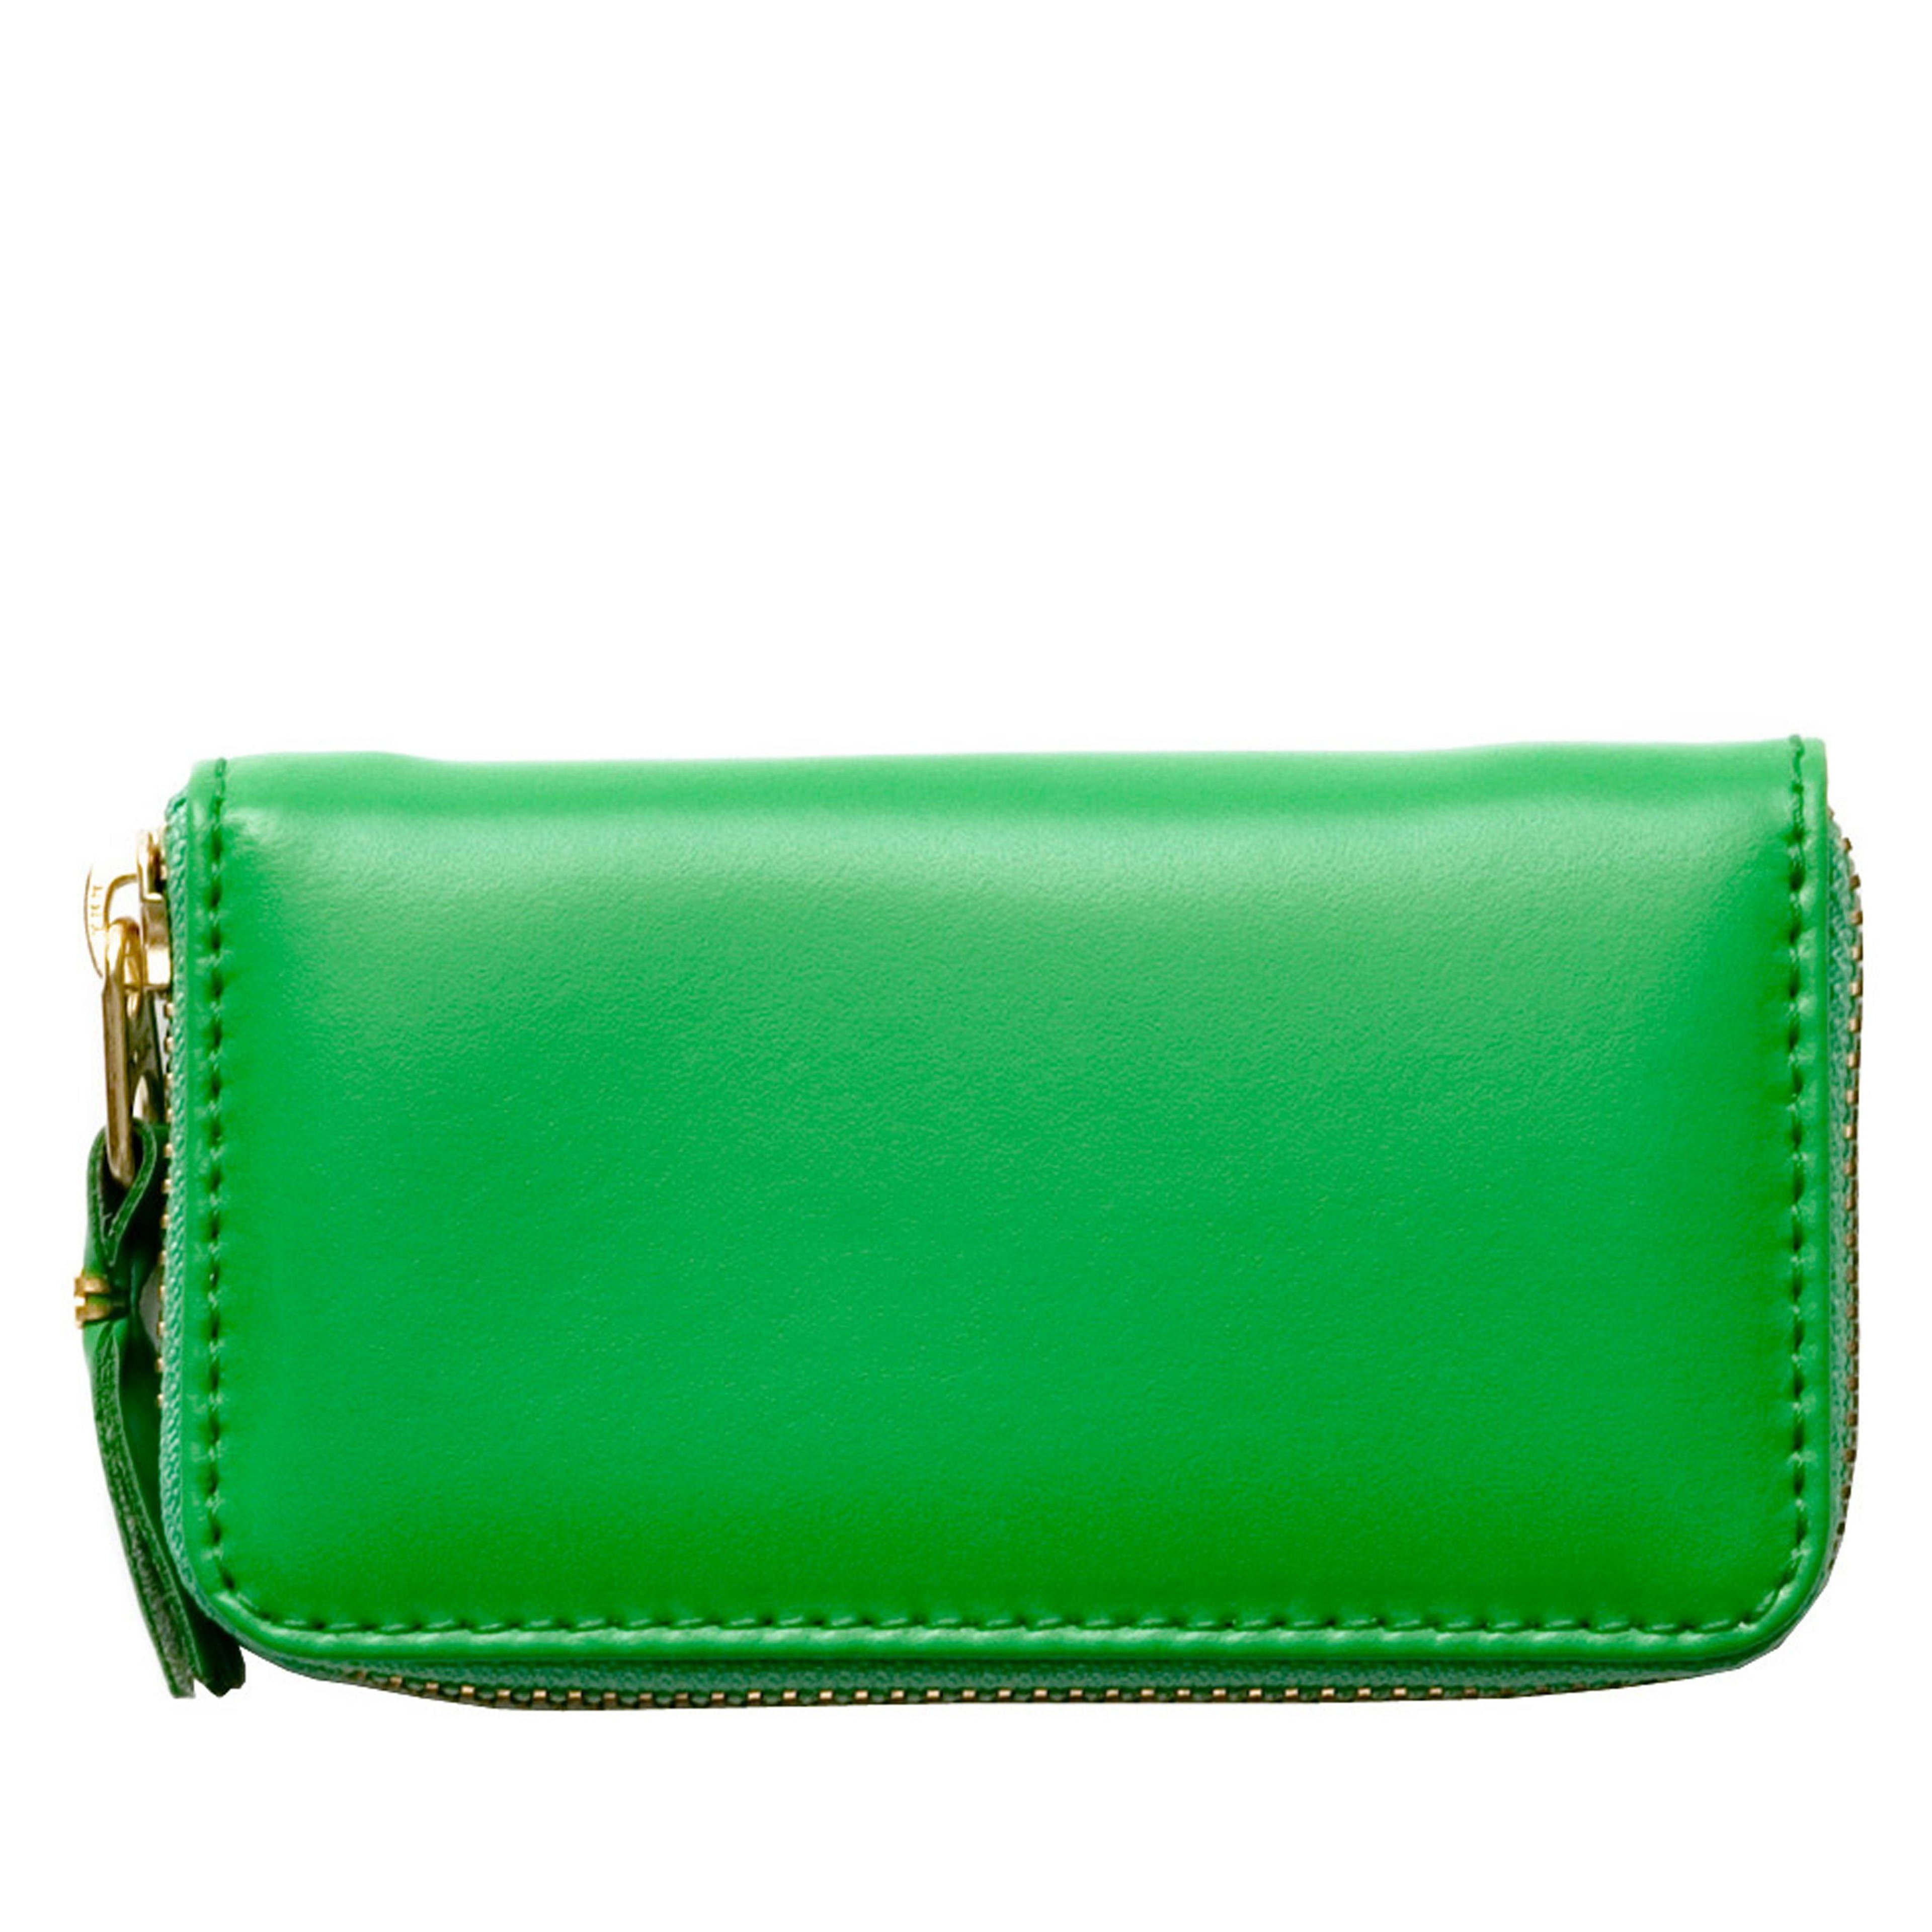 CDG Wallet - Classic Leather - (Green) by COMME DES GARCONS